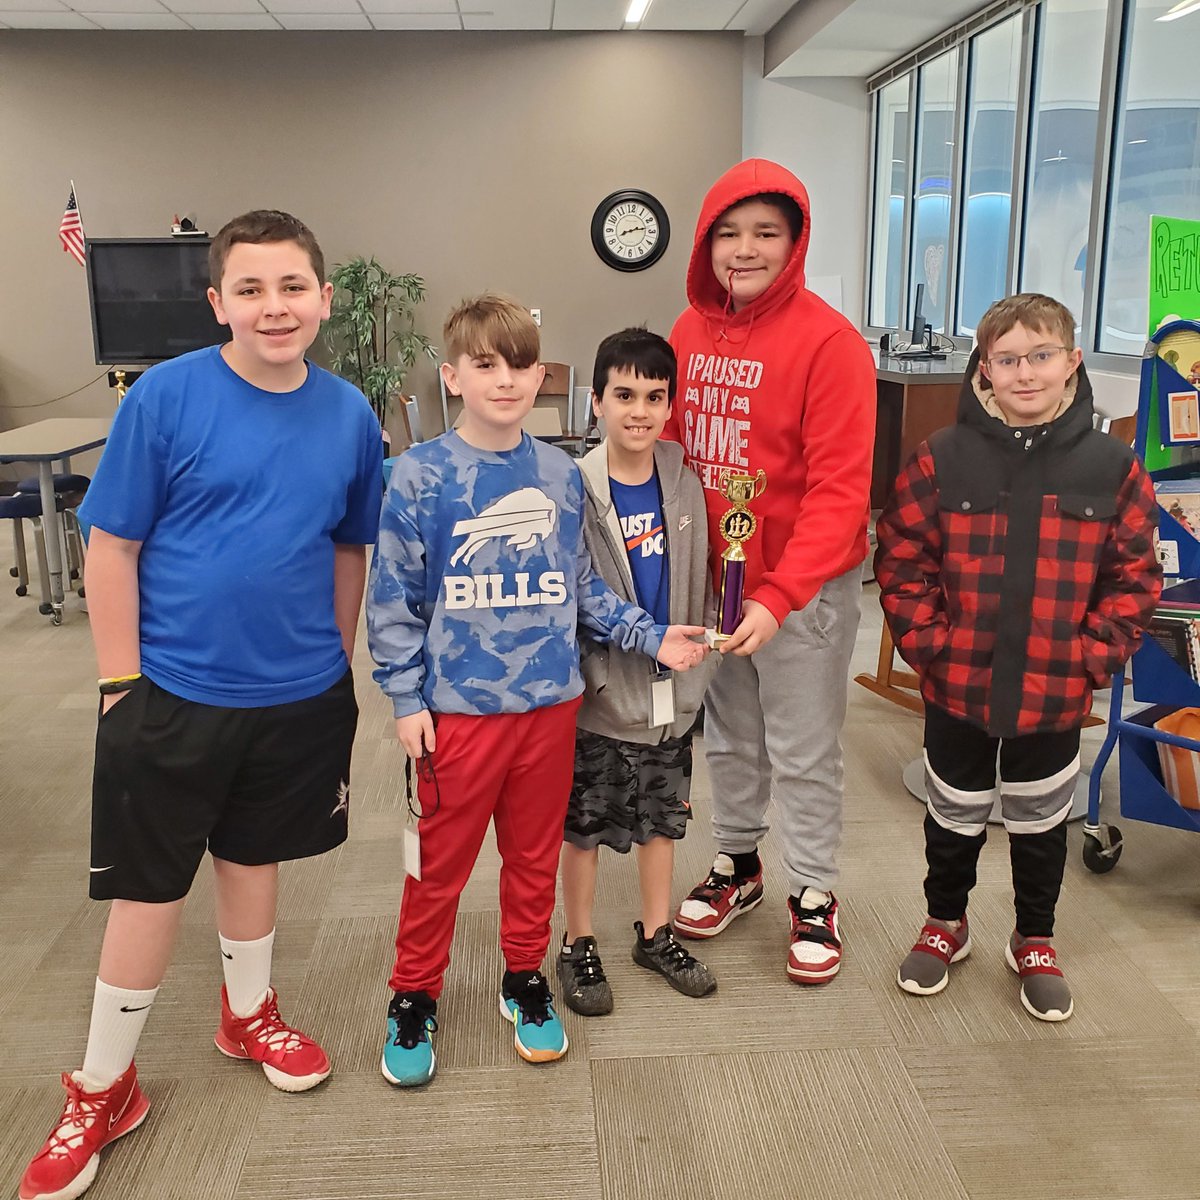 #esmPGproud of our #chess team who placed 3rd in the local tournament! Join is Thursdays in the library!